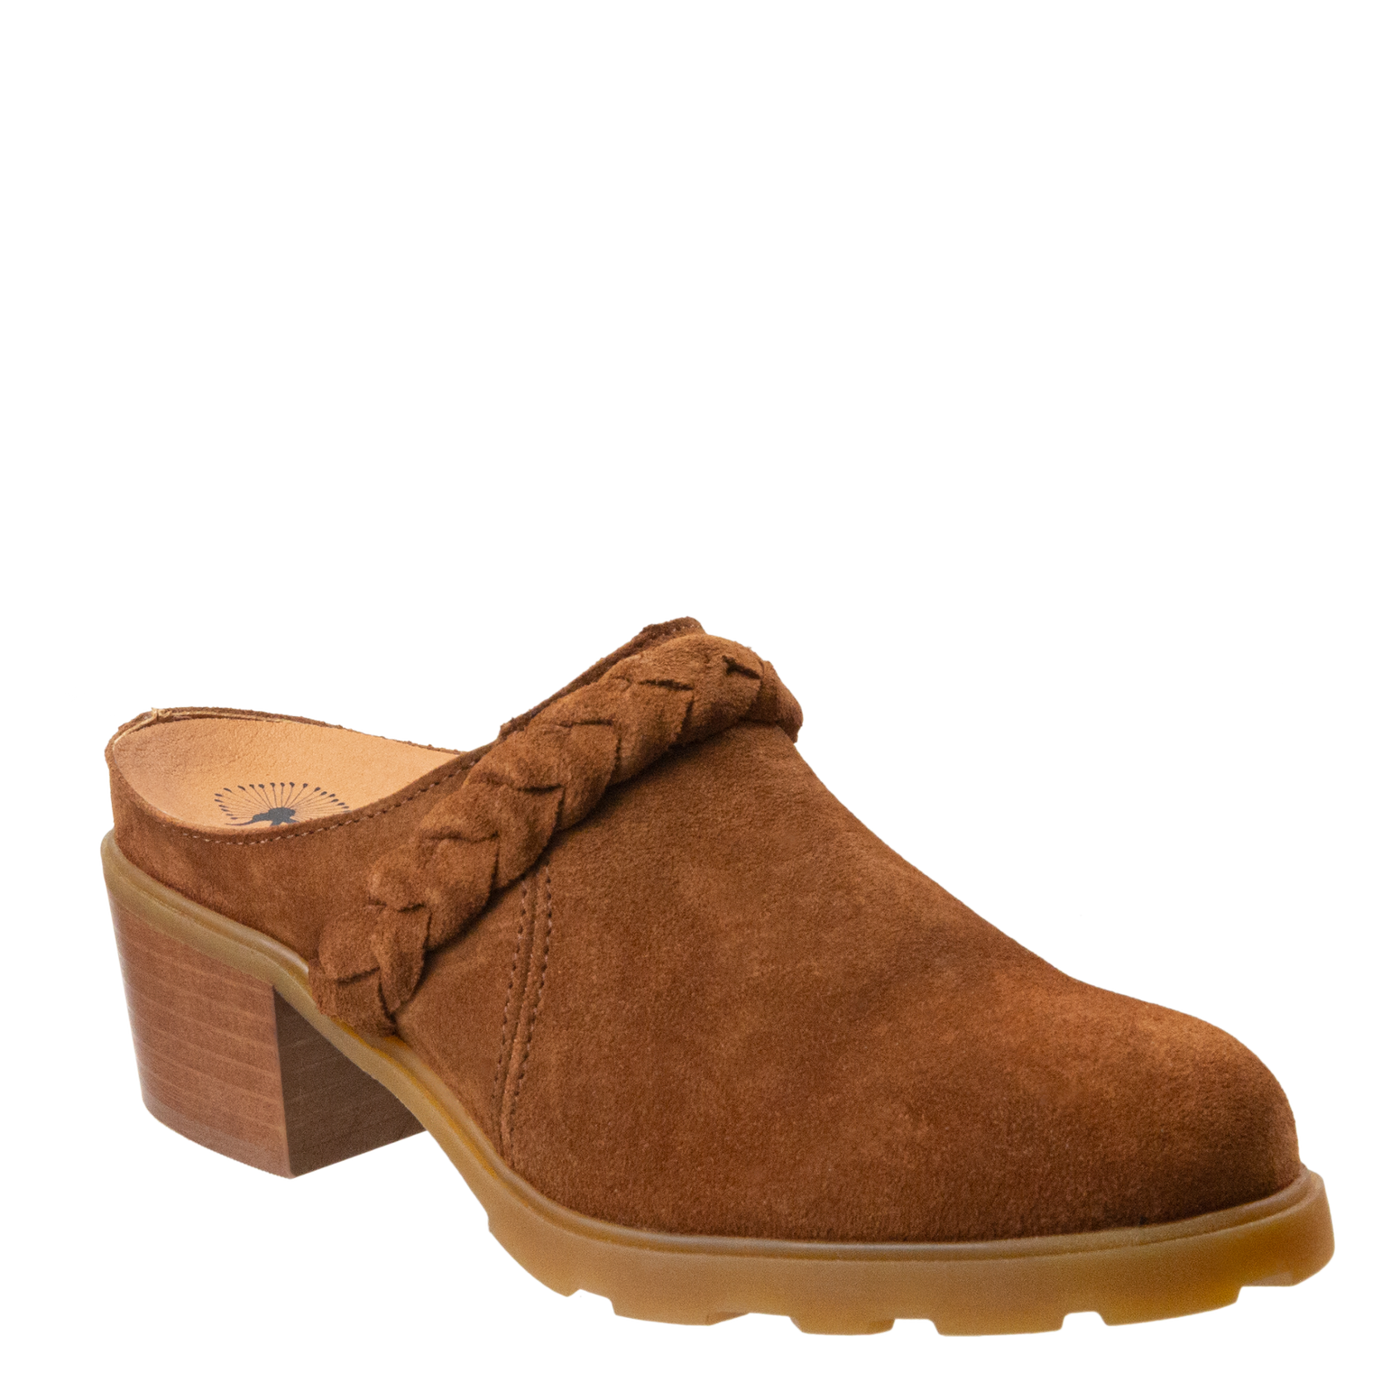 OTBT - WEST in CAMEL Heeled Mules